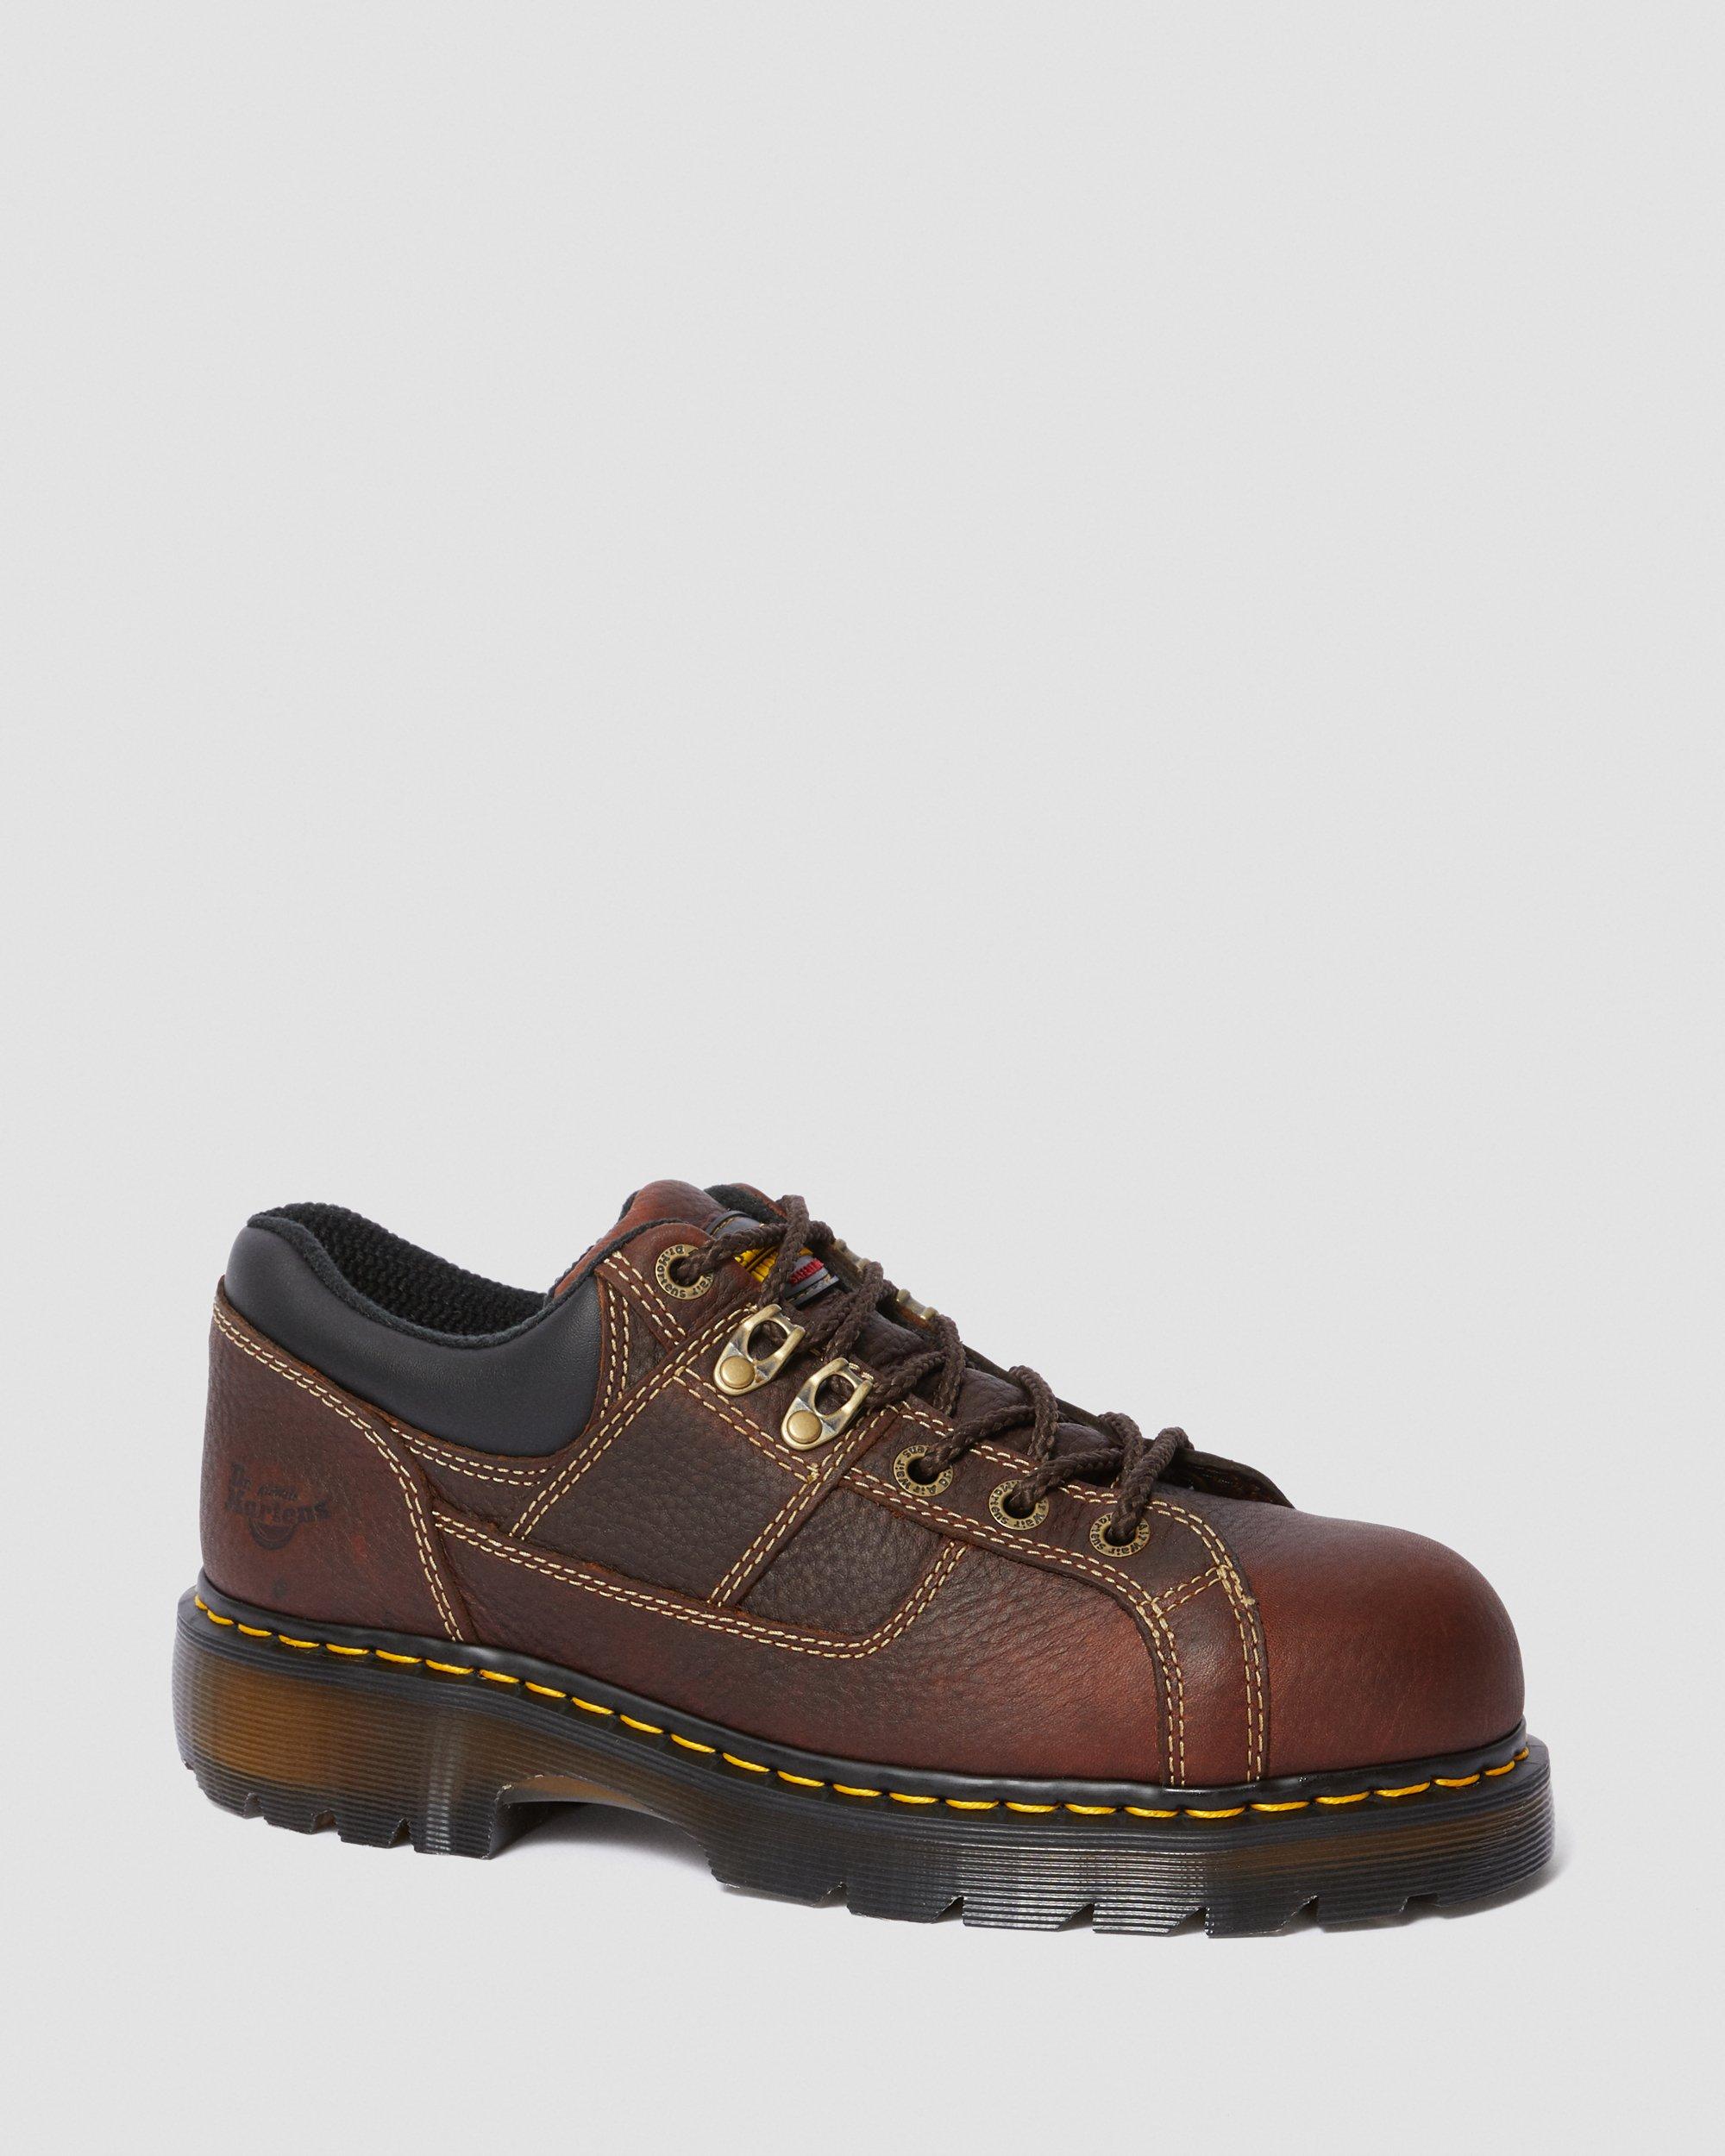 doc martin industrial boots